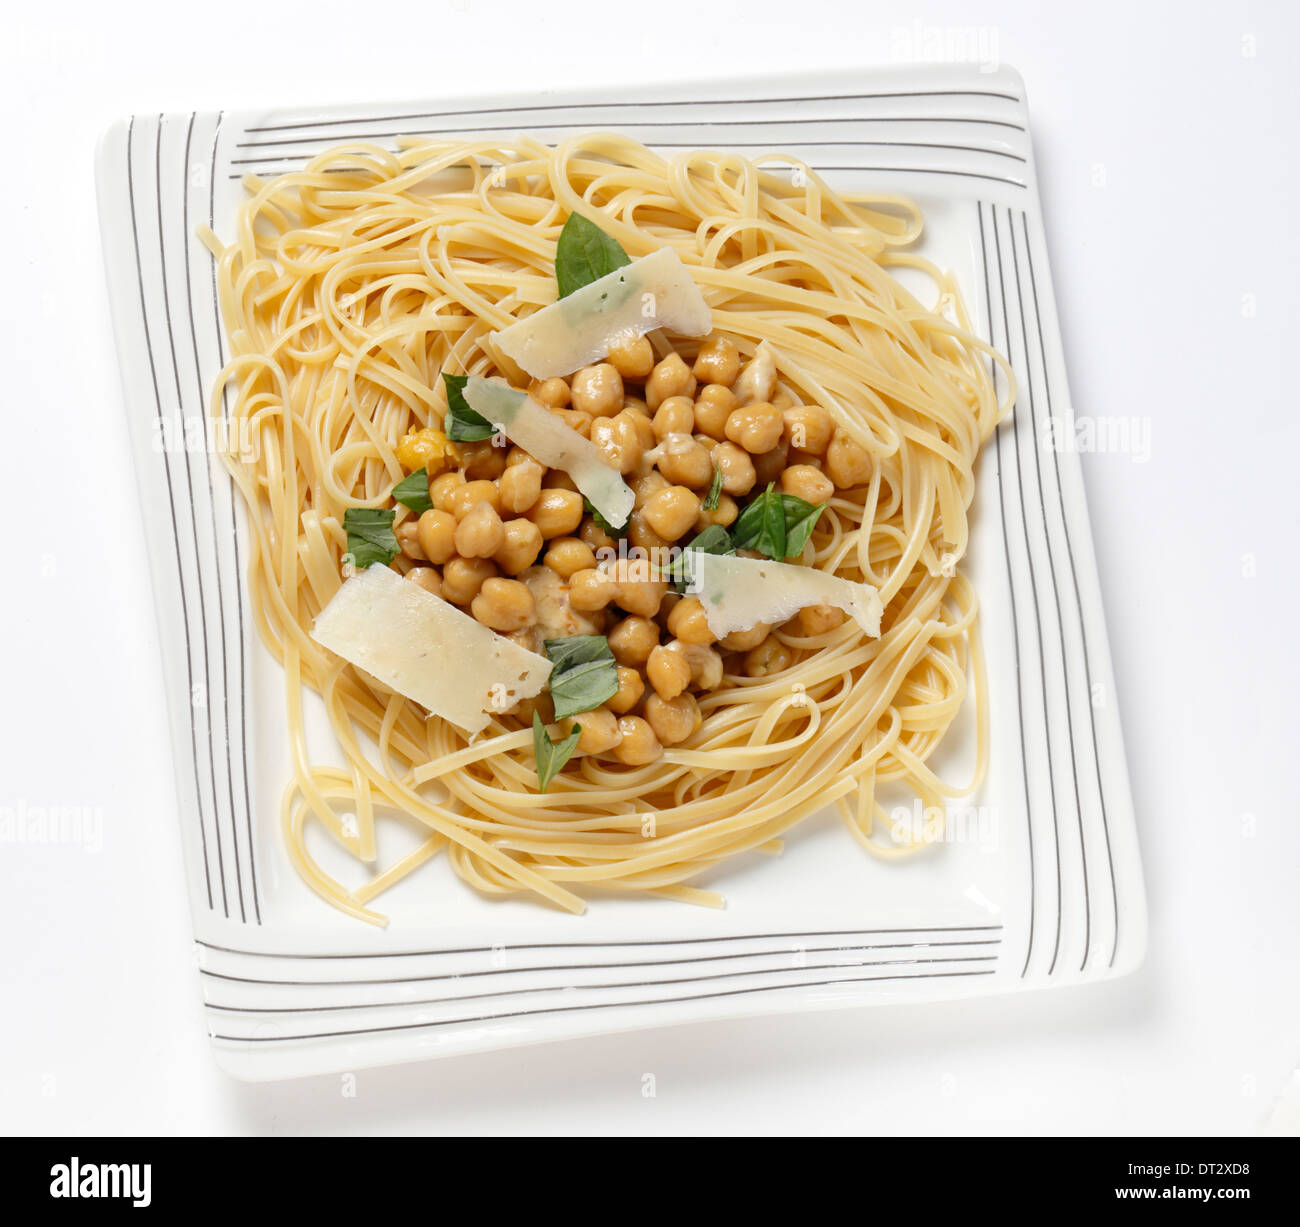 Bavette pasta (like linguine)  with a chickpea, garlic, chili and parmesan sauce, and garnished with torn basil leaves Stock Photo